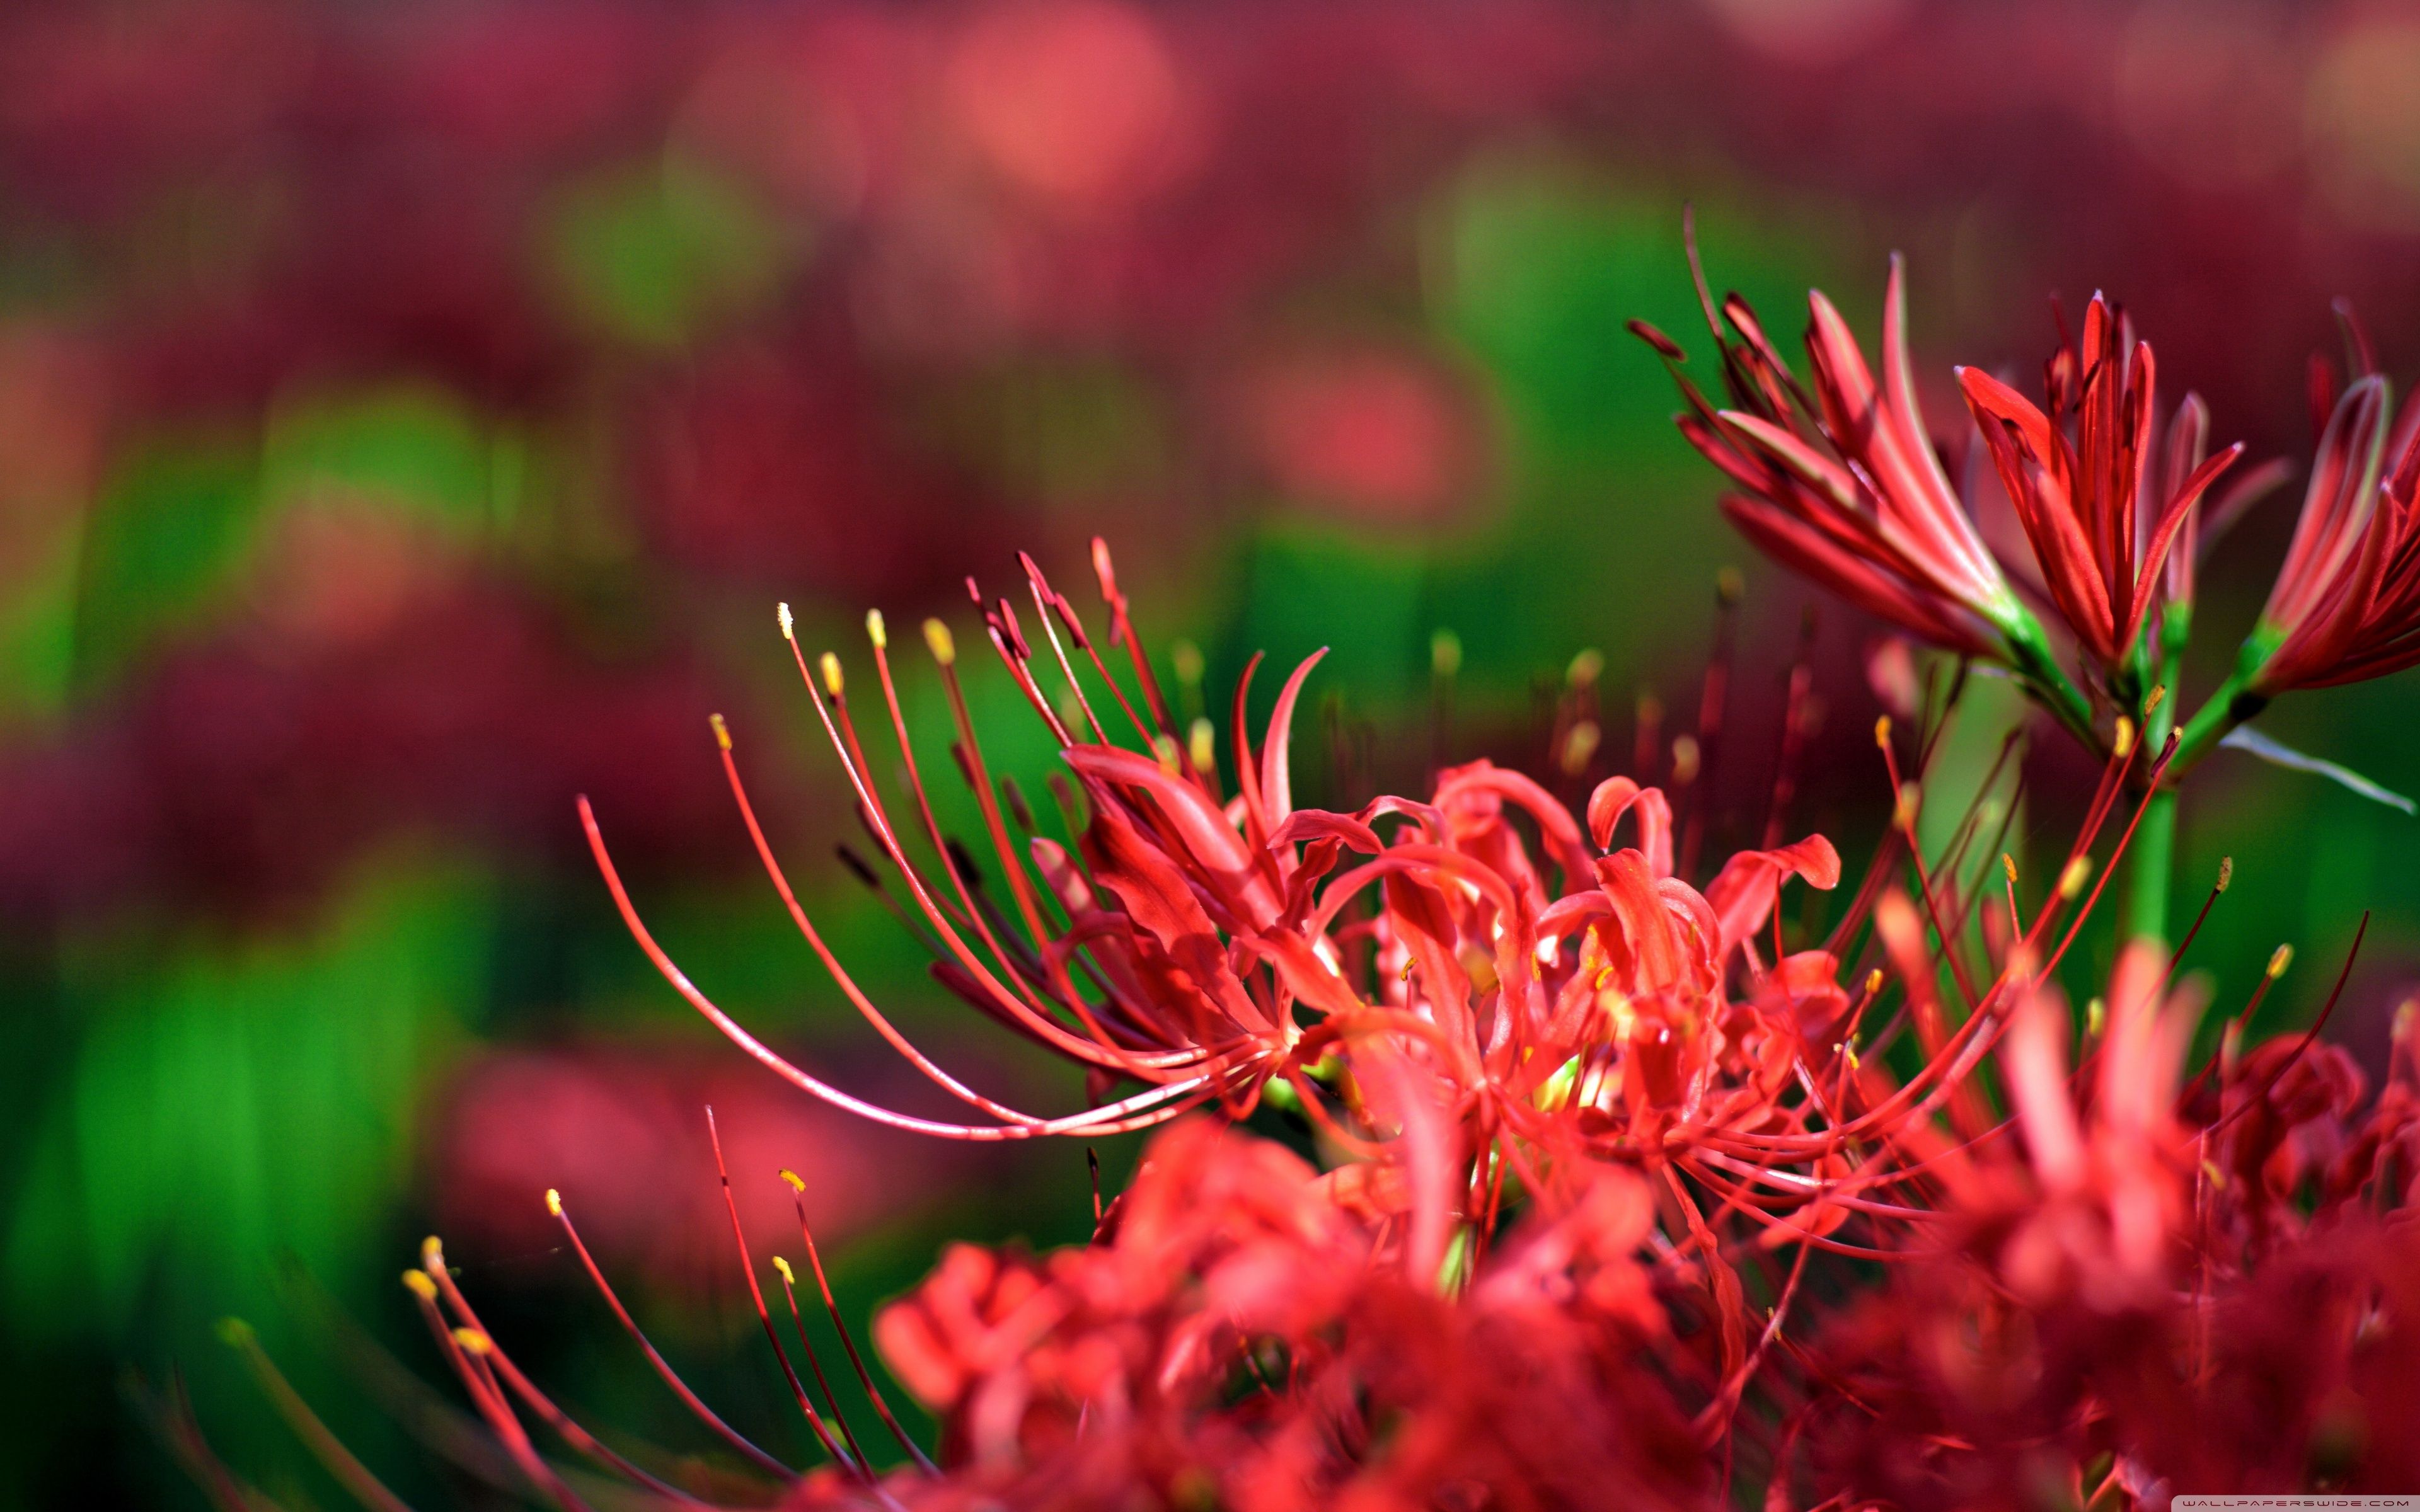 Red Spider Lily Pictures  Download Free Images on Unsplash